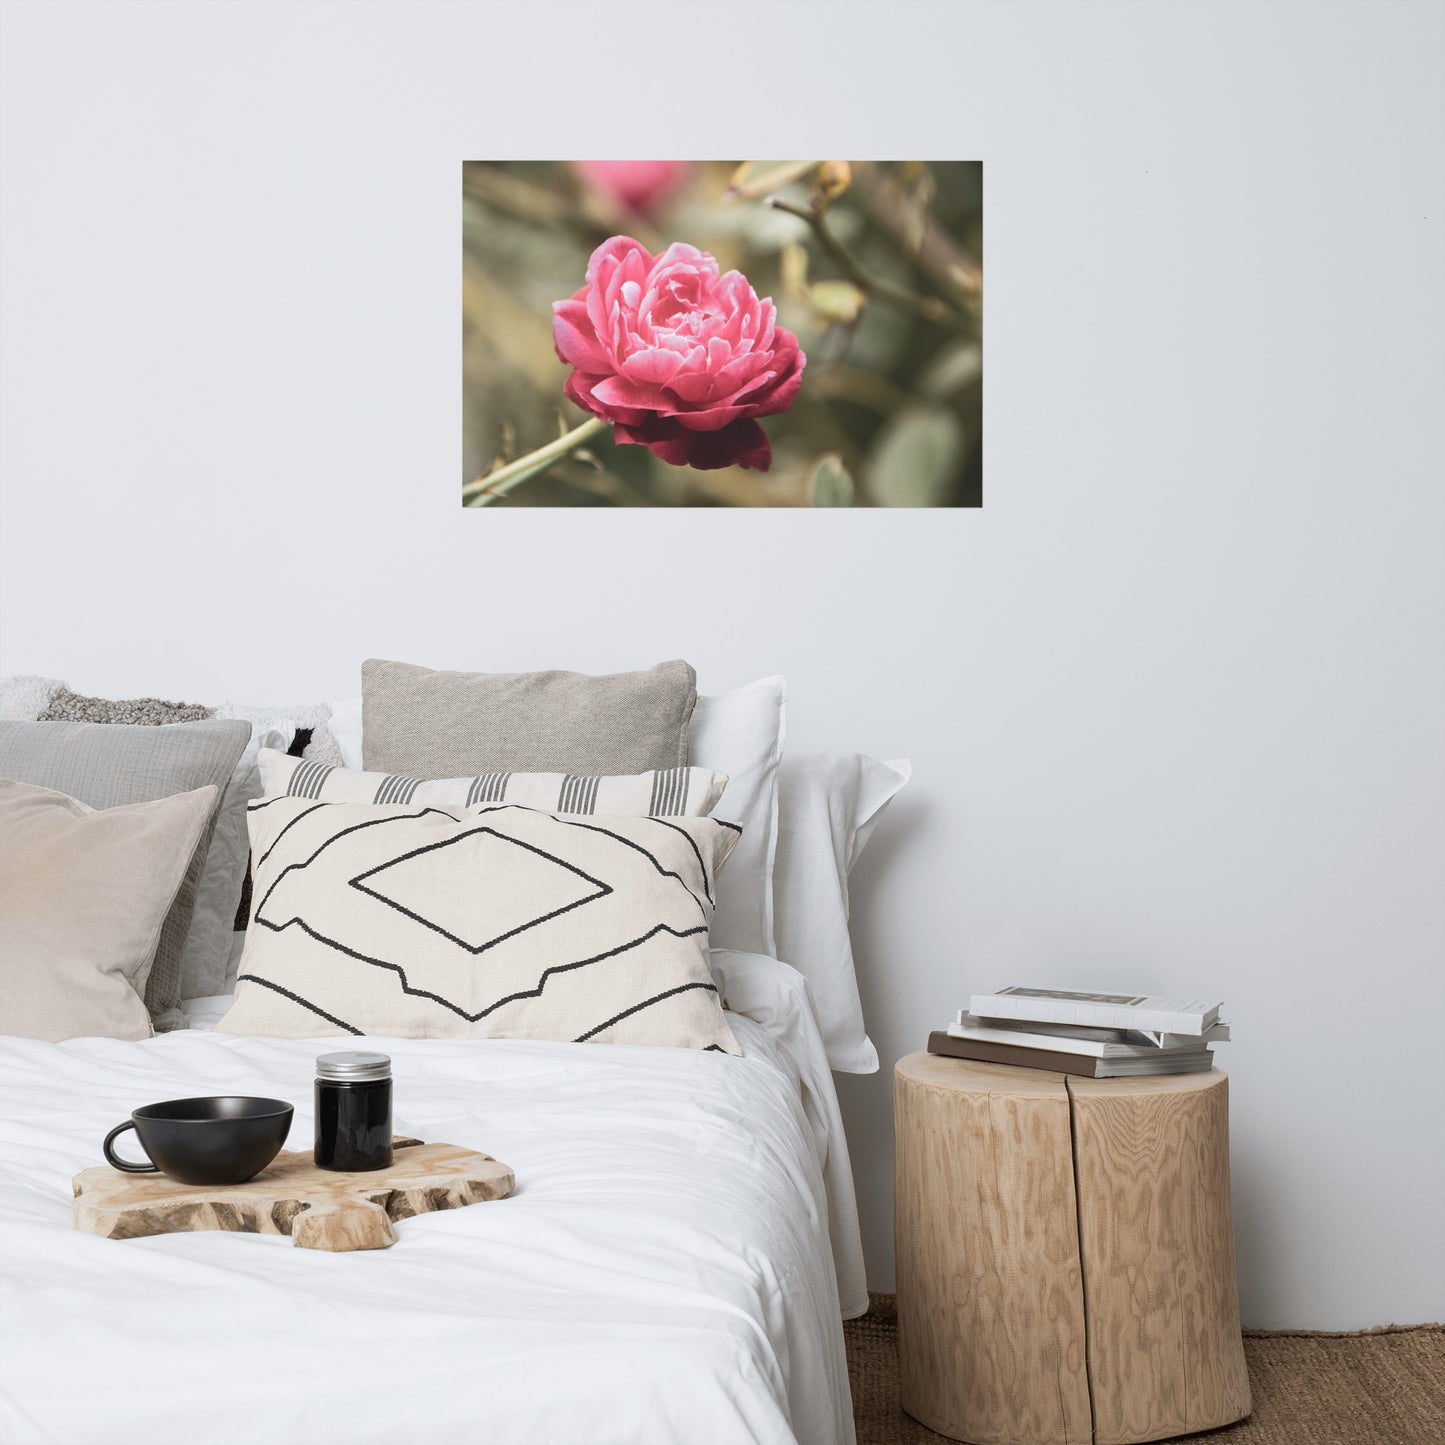 Perfect Petals Colorized Floral Nature Photo Loose Unframed Wall Art Prints